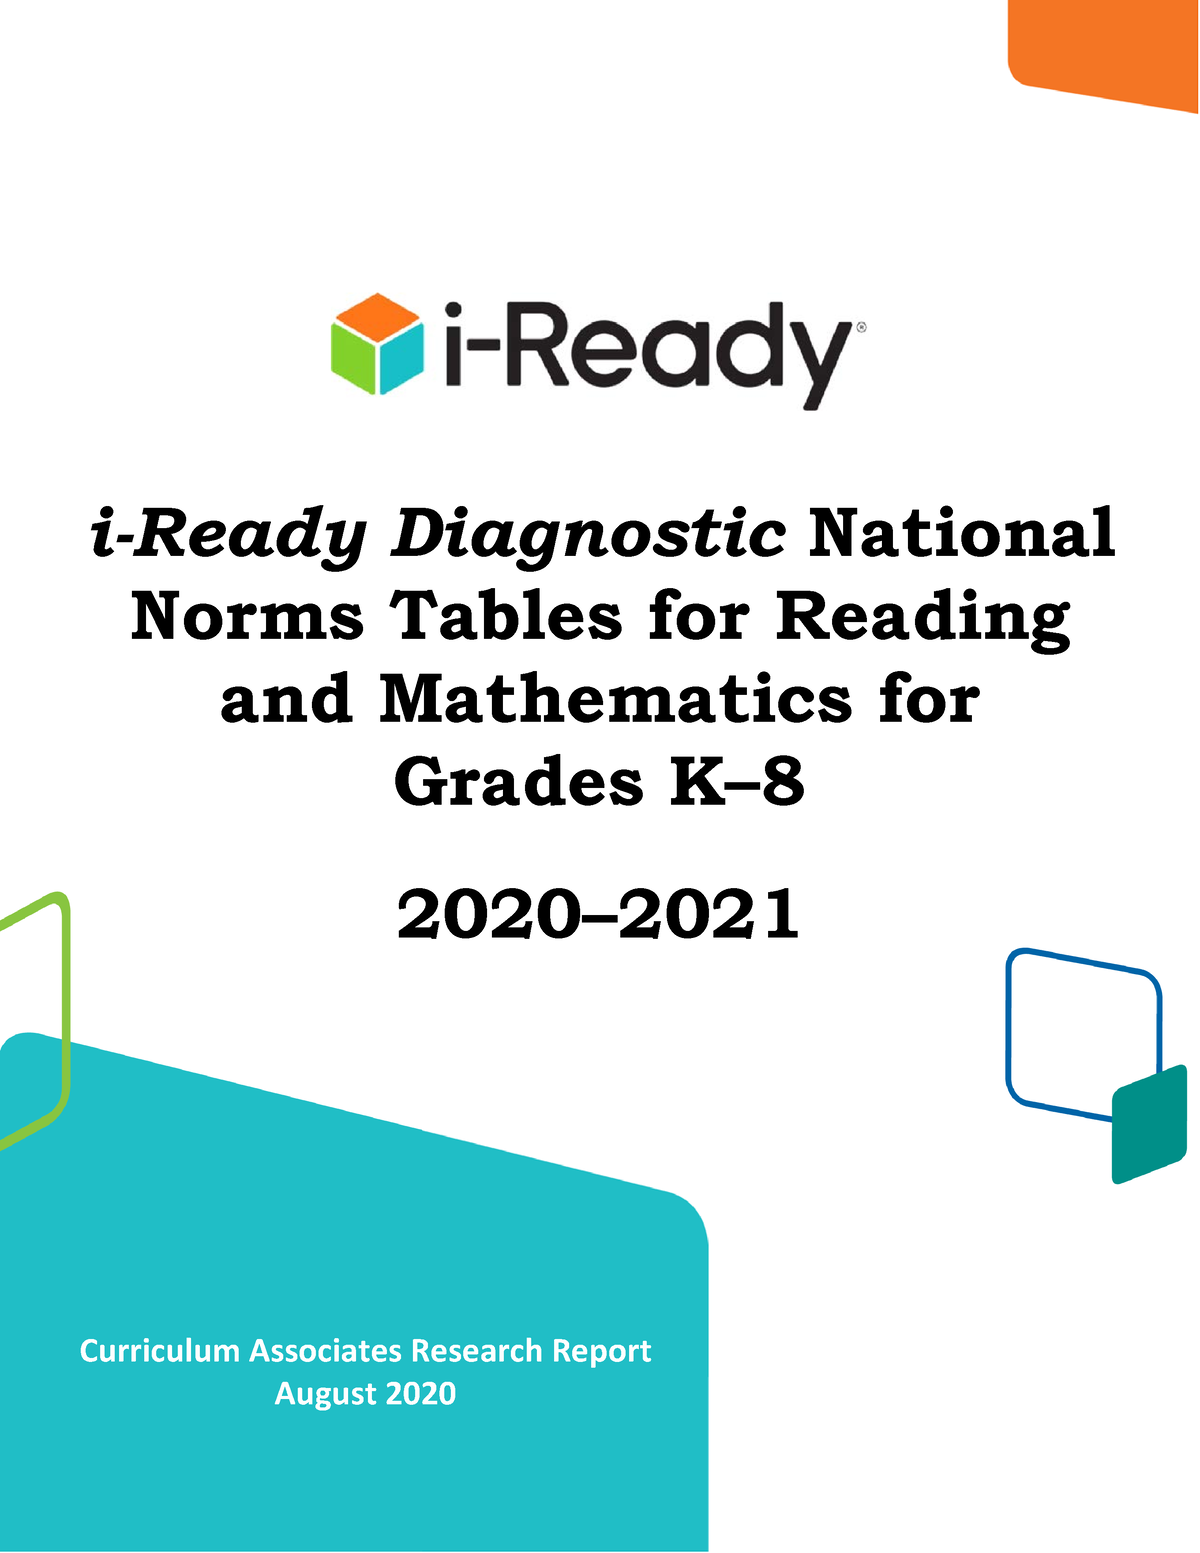 IreadynormstablesK820202021 school year Norms Tables for